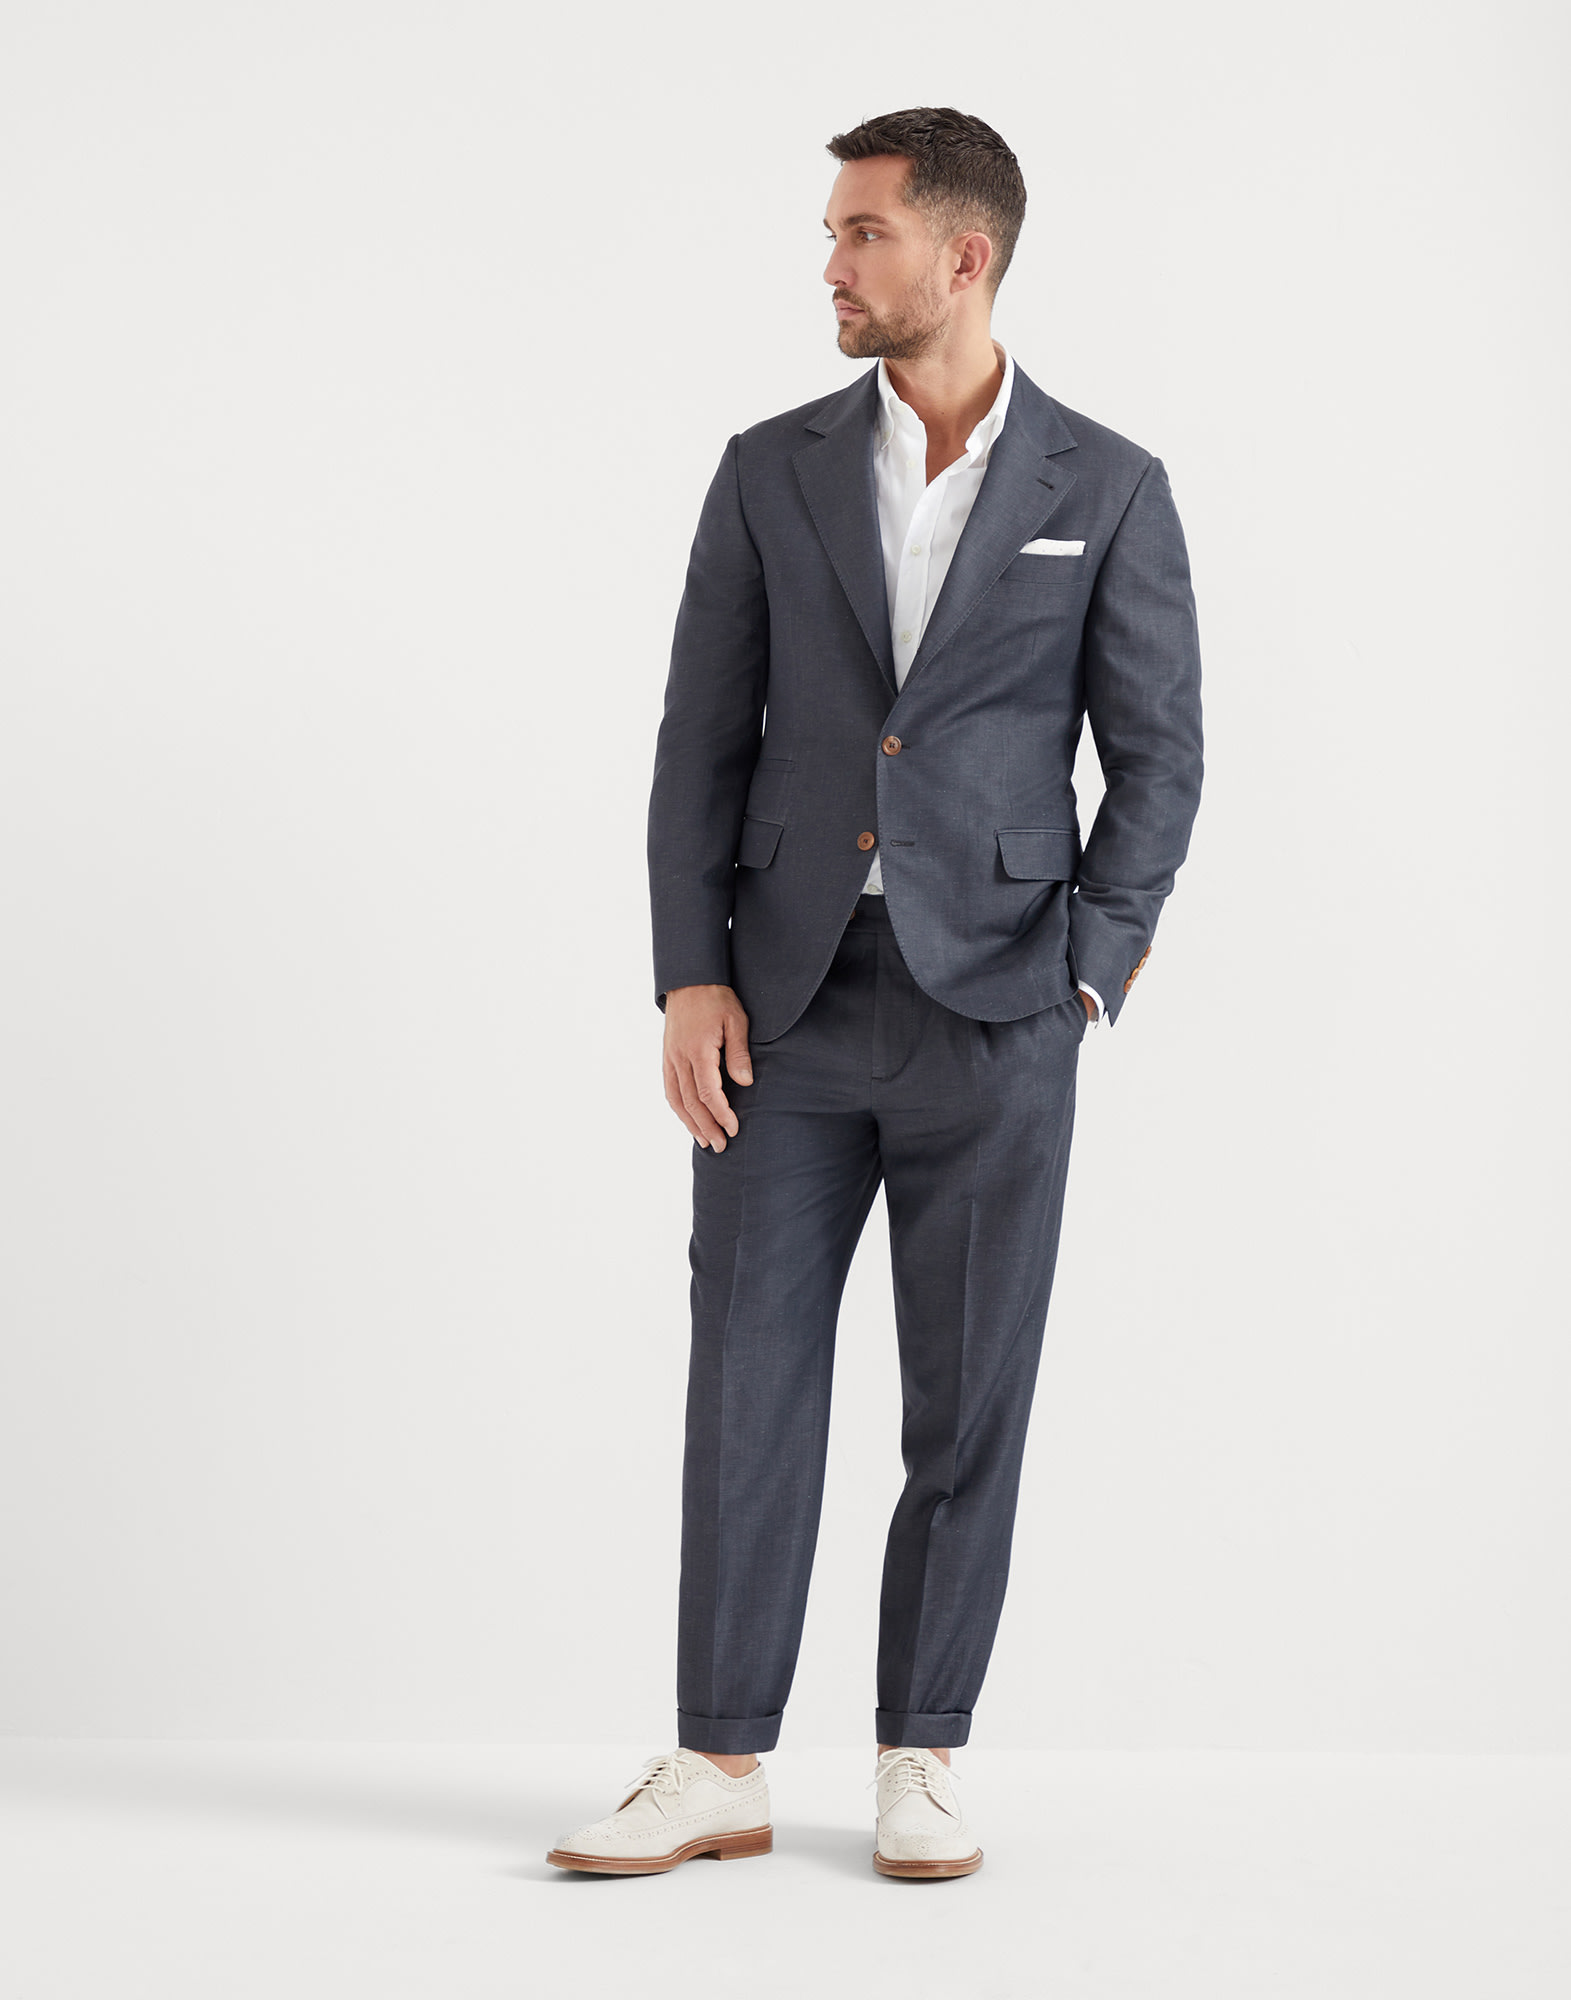 Wool and linen twill suit